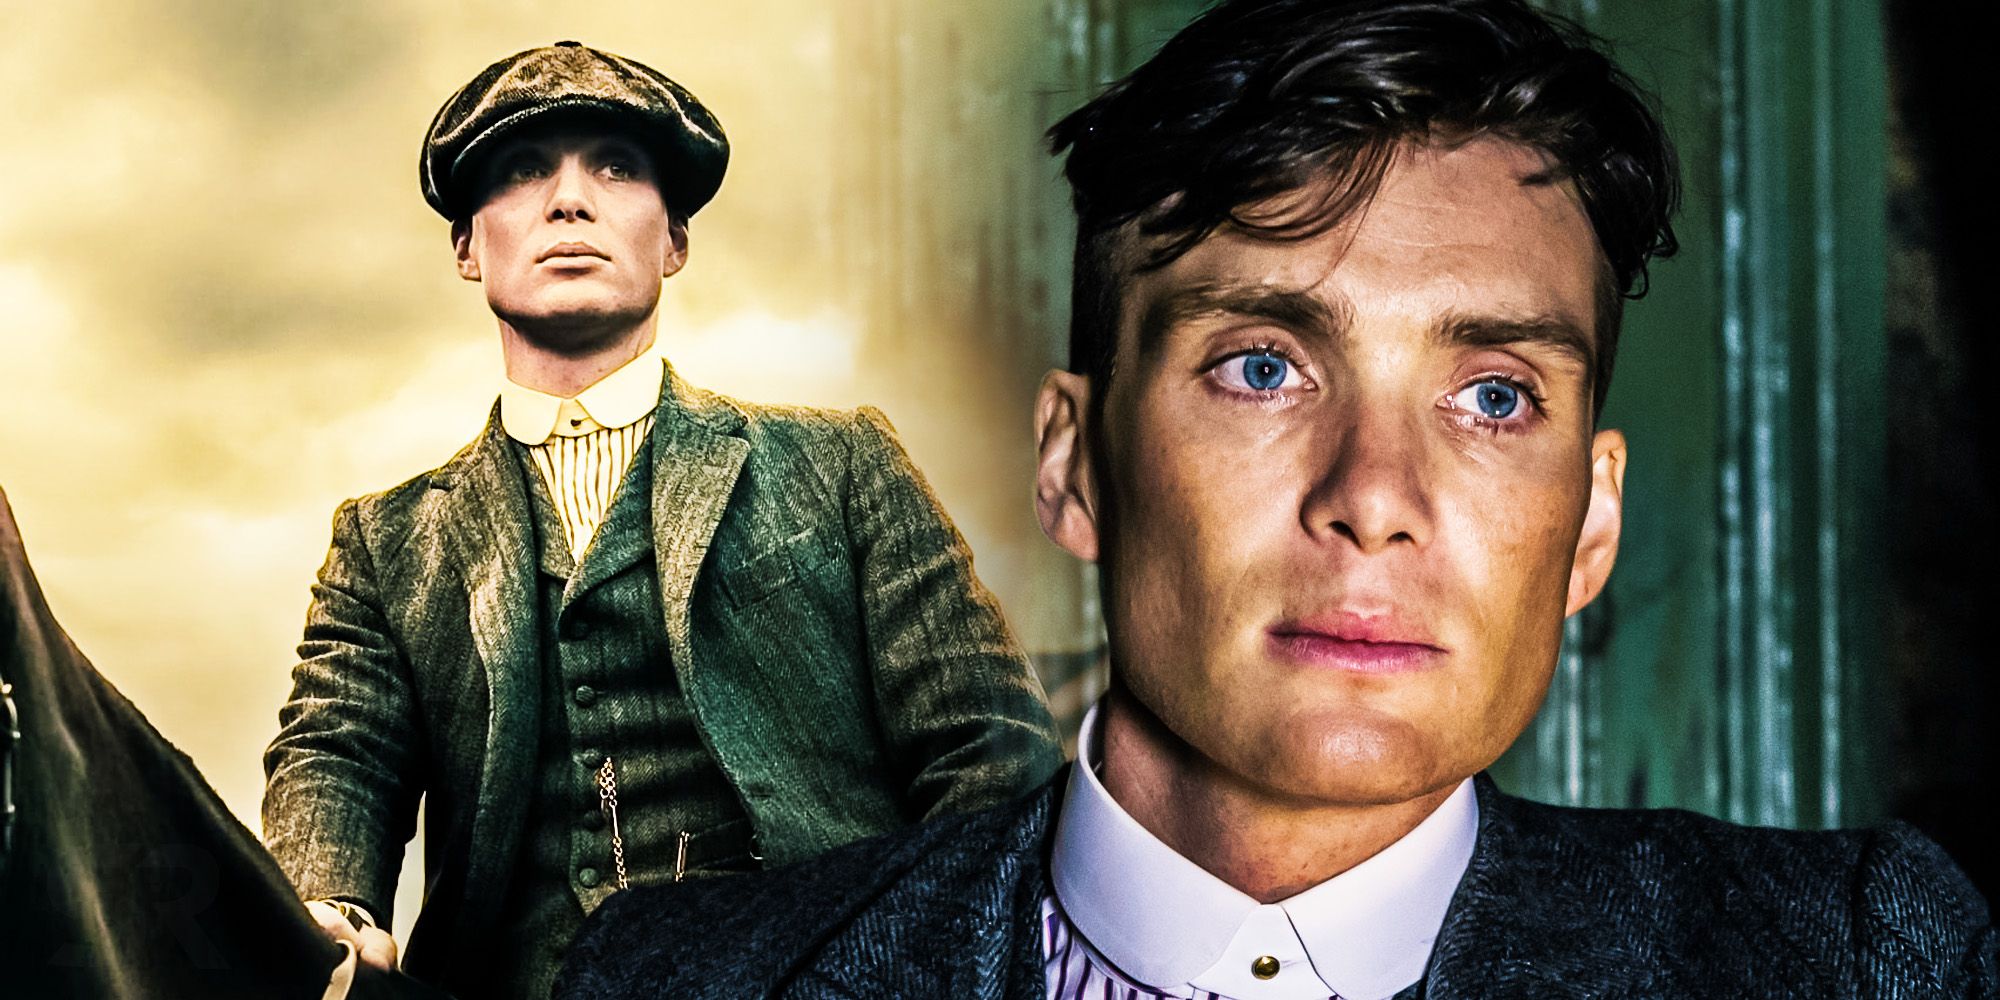 The Peaky Blinders Movie Will Permanently Change How You See Tommy Shelby